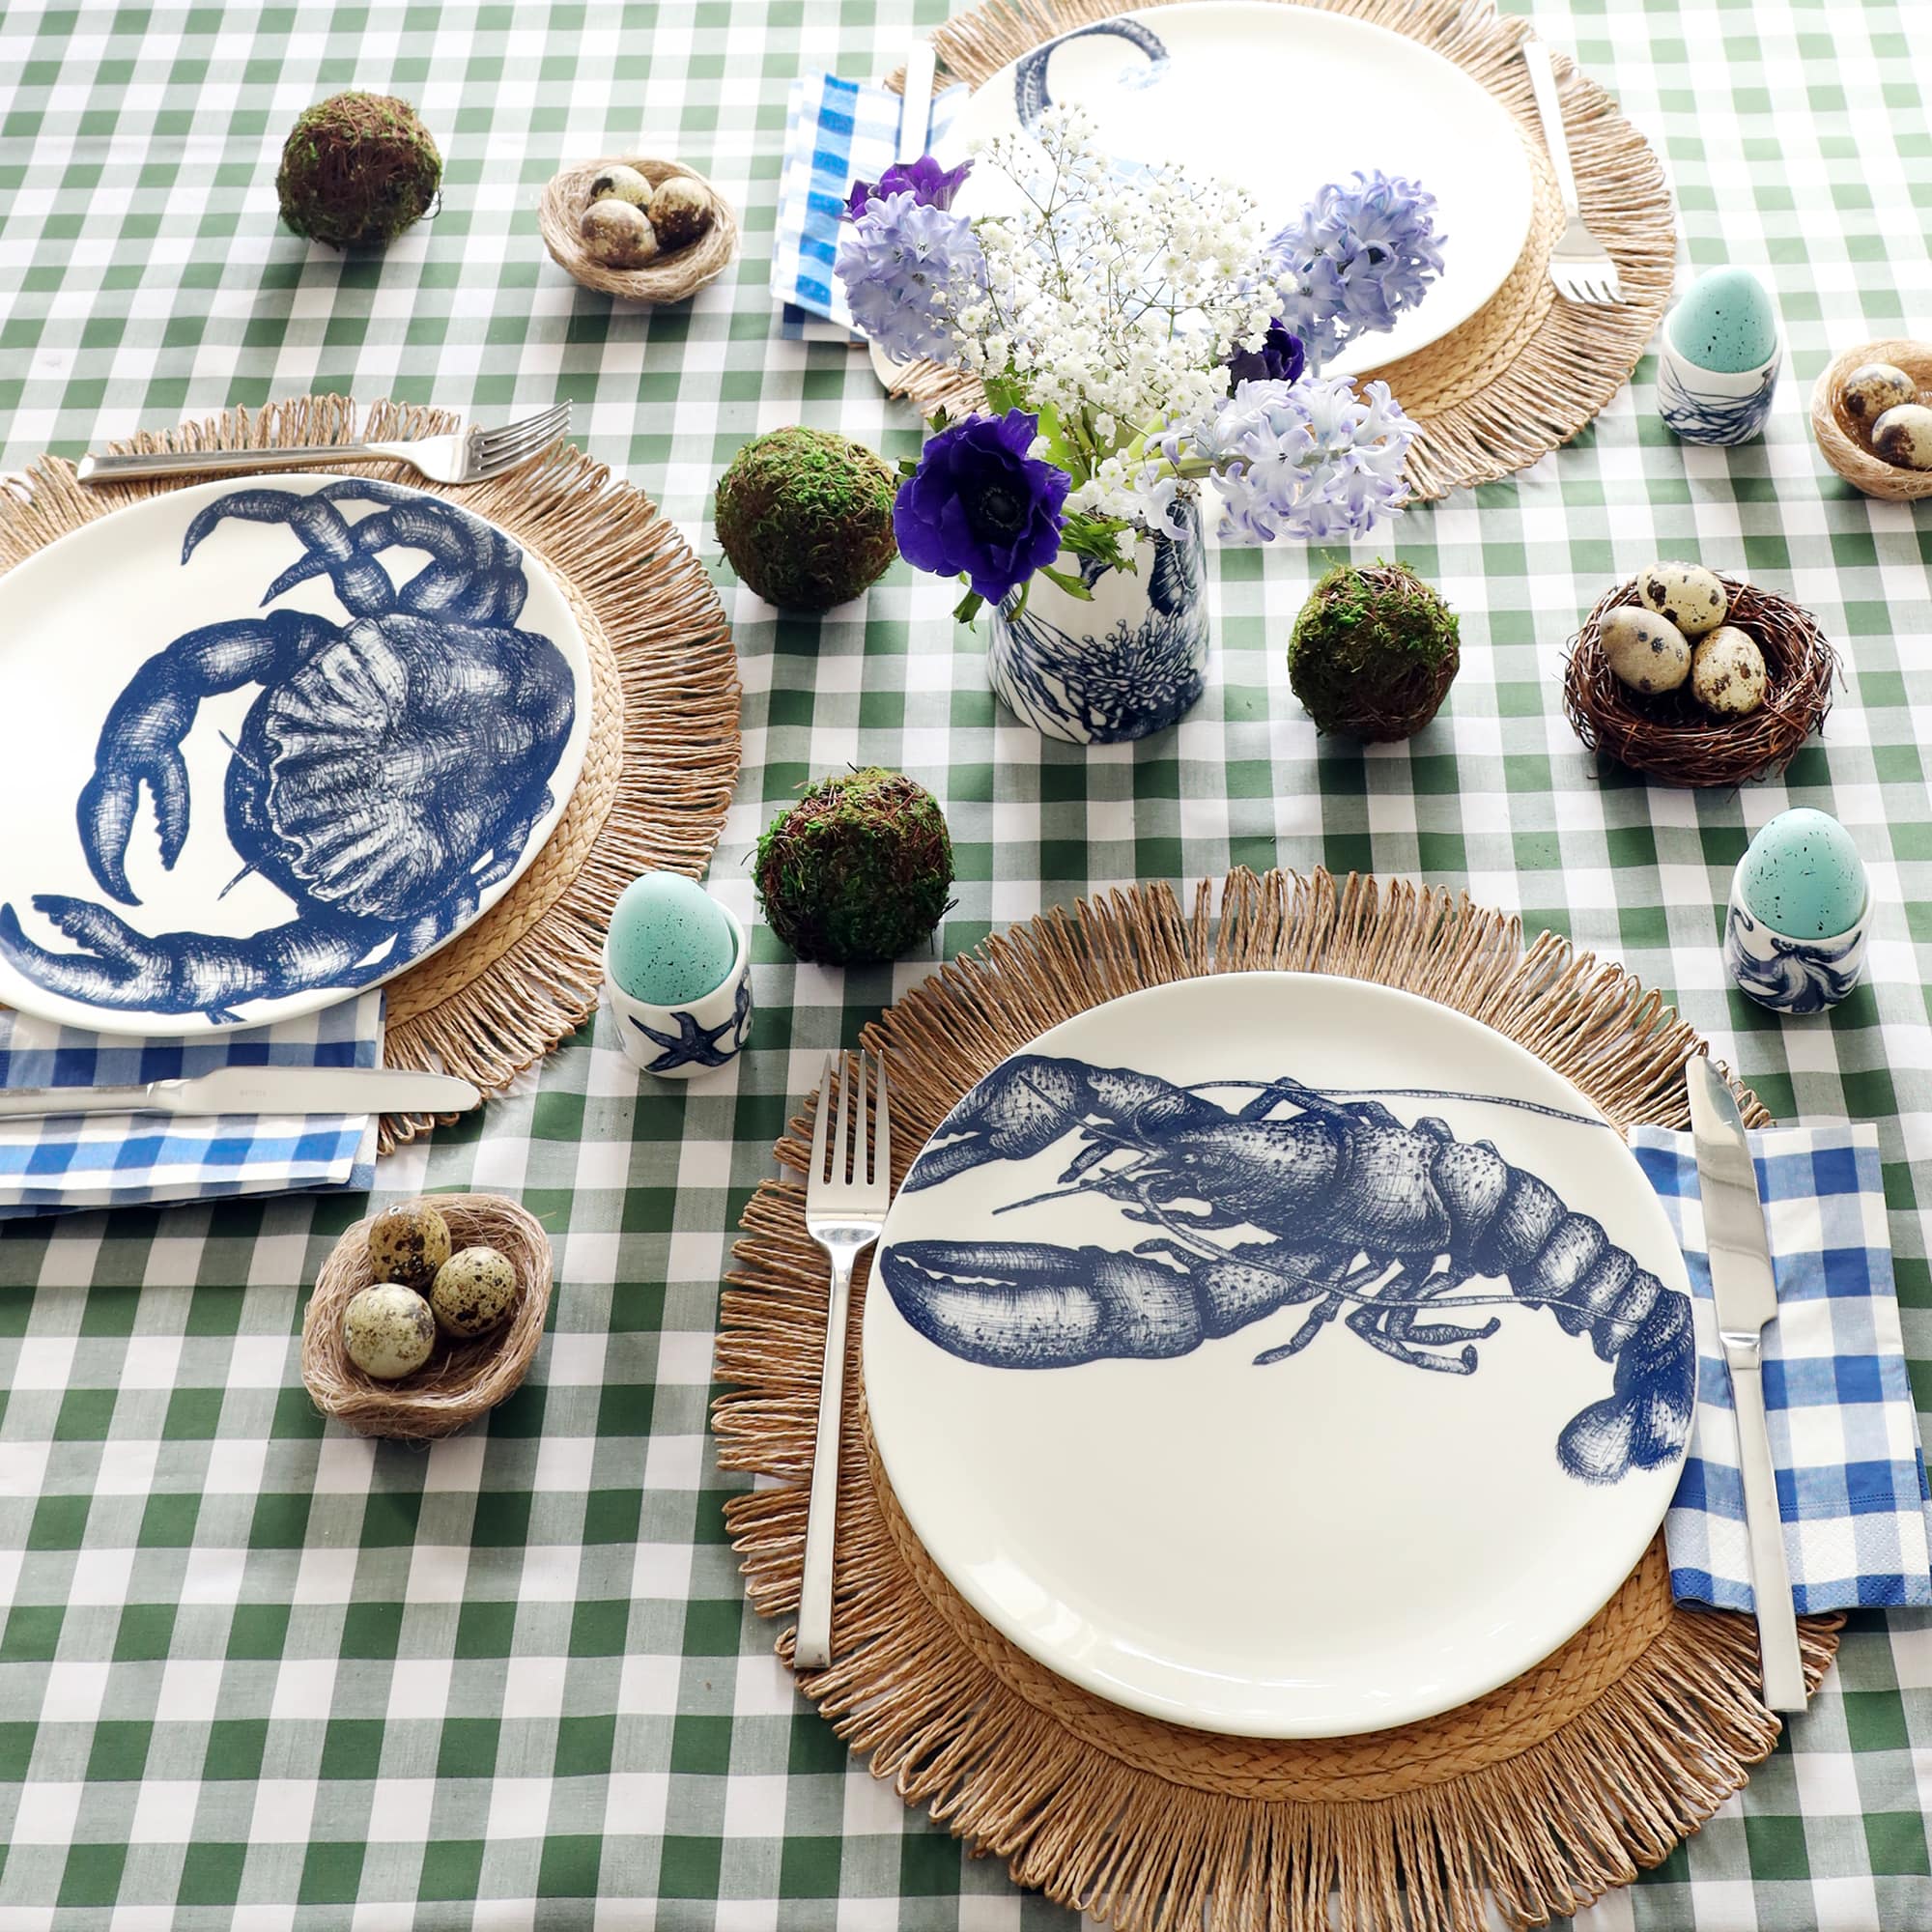 Easter table setting with blue and white china with sea creatures on. In the foreground is a plate with a navy lobster illustration, sitting on a raffia placemat and green gingham tablecloth. There are moss balls, light blue eggs and small nests with quails eggs in decorating the table.